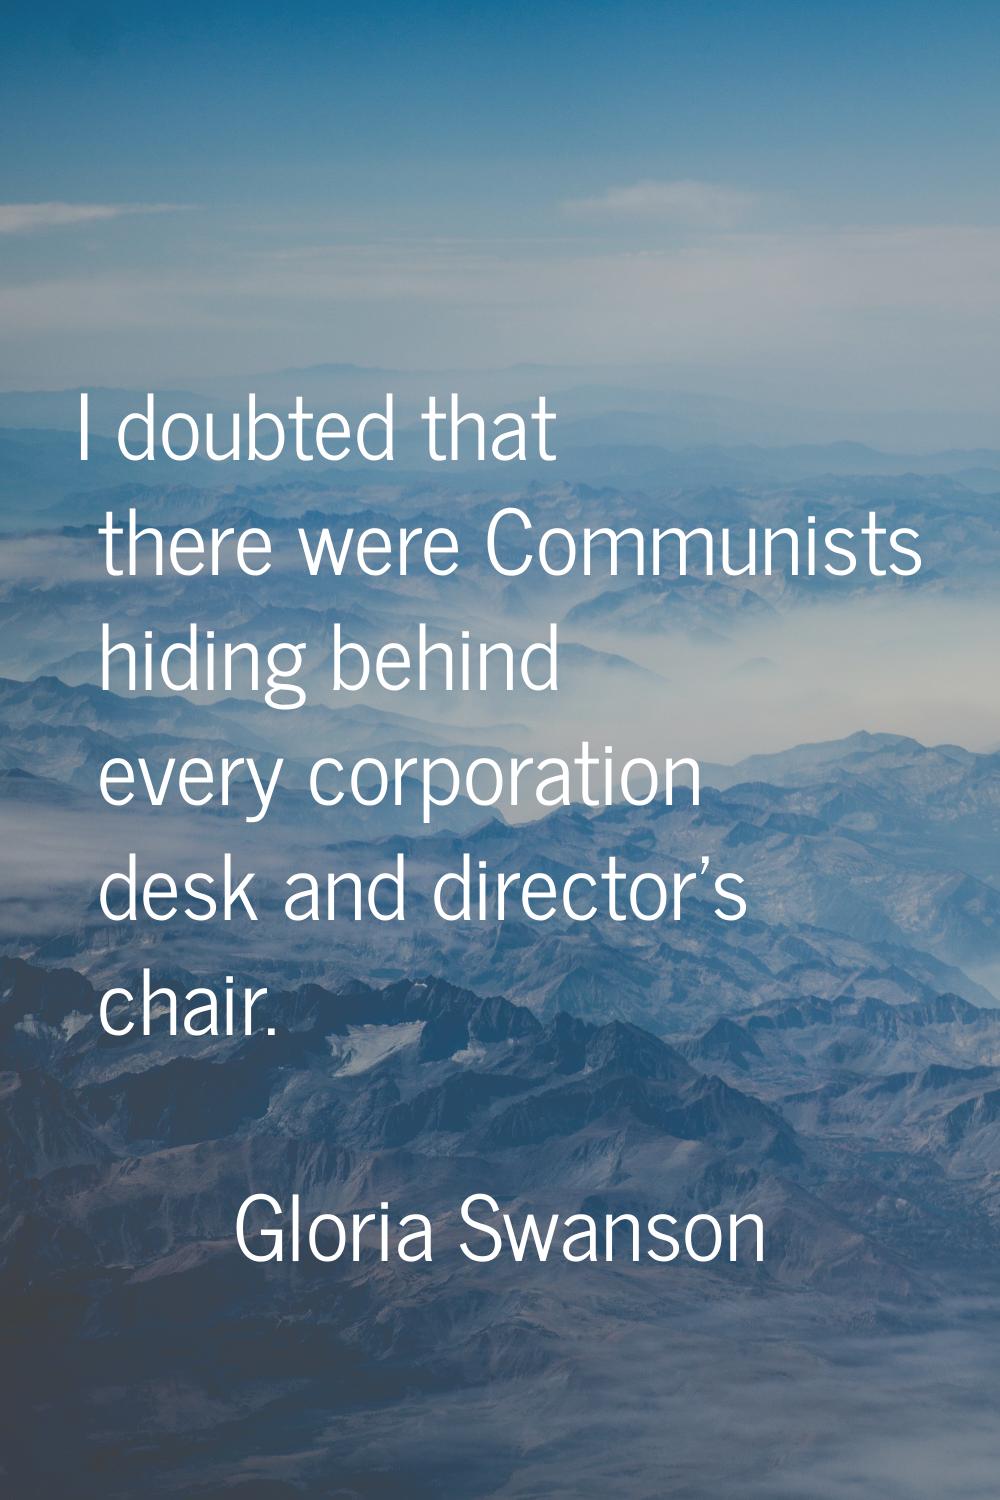 I doubted that there were Communists hiding behind every corporation desk and director's chair.